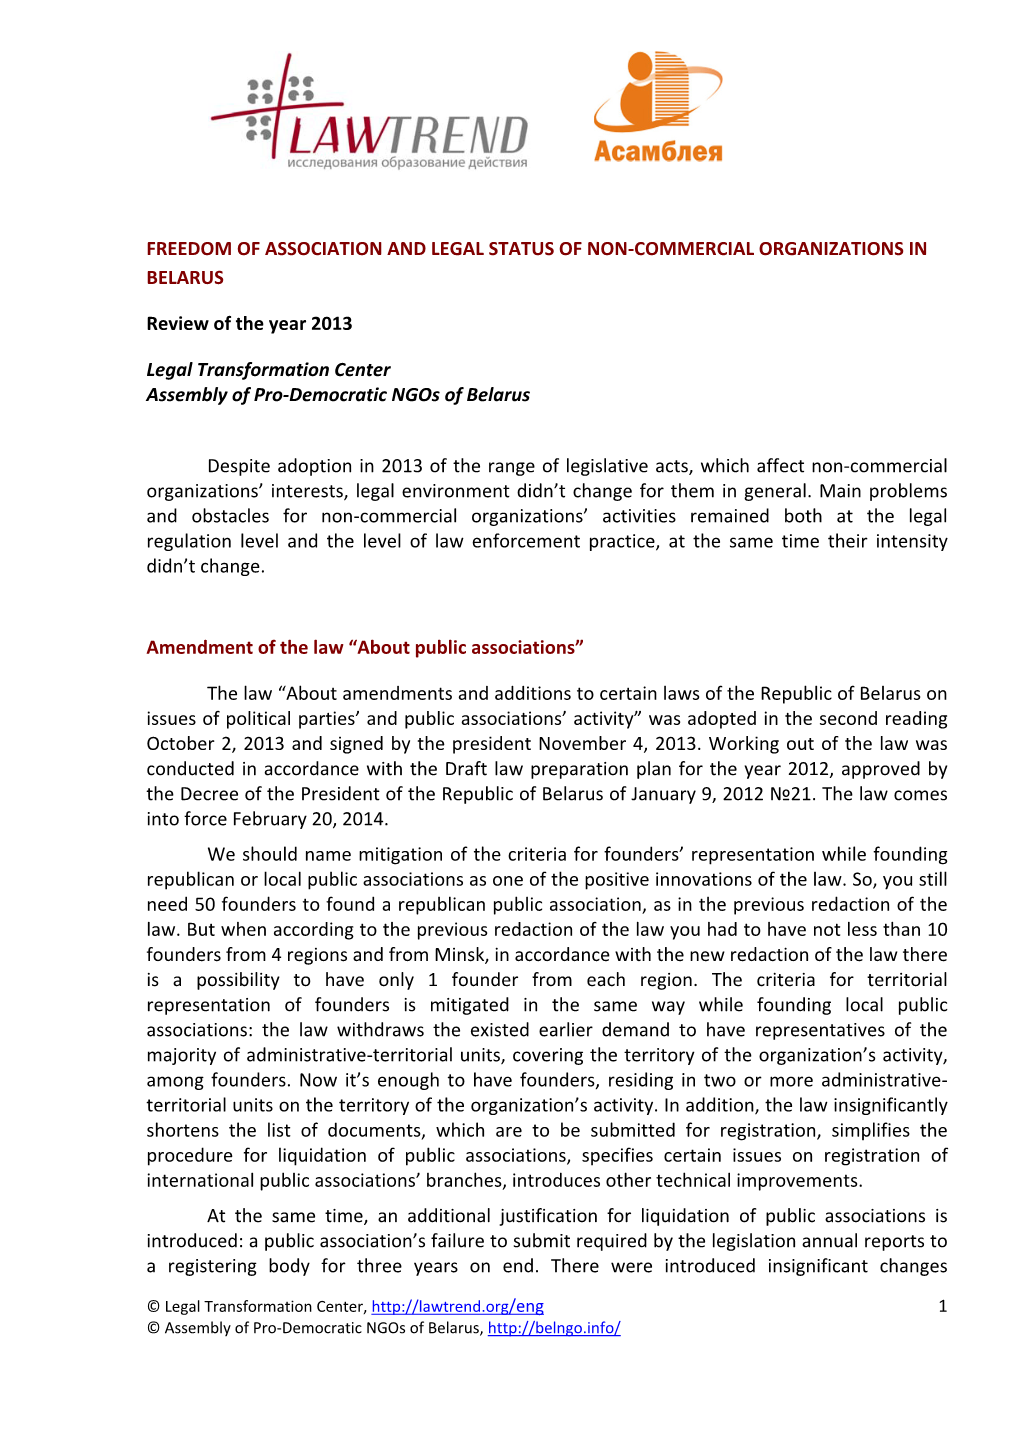 Freedom of Association and Legal Status of Non‐Commercial Organizations in Belarus